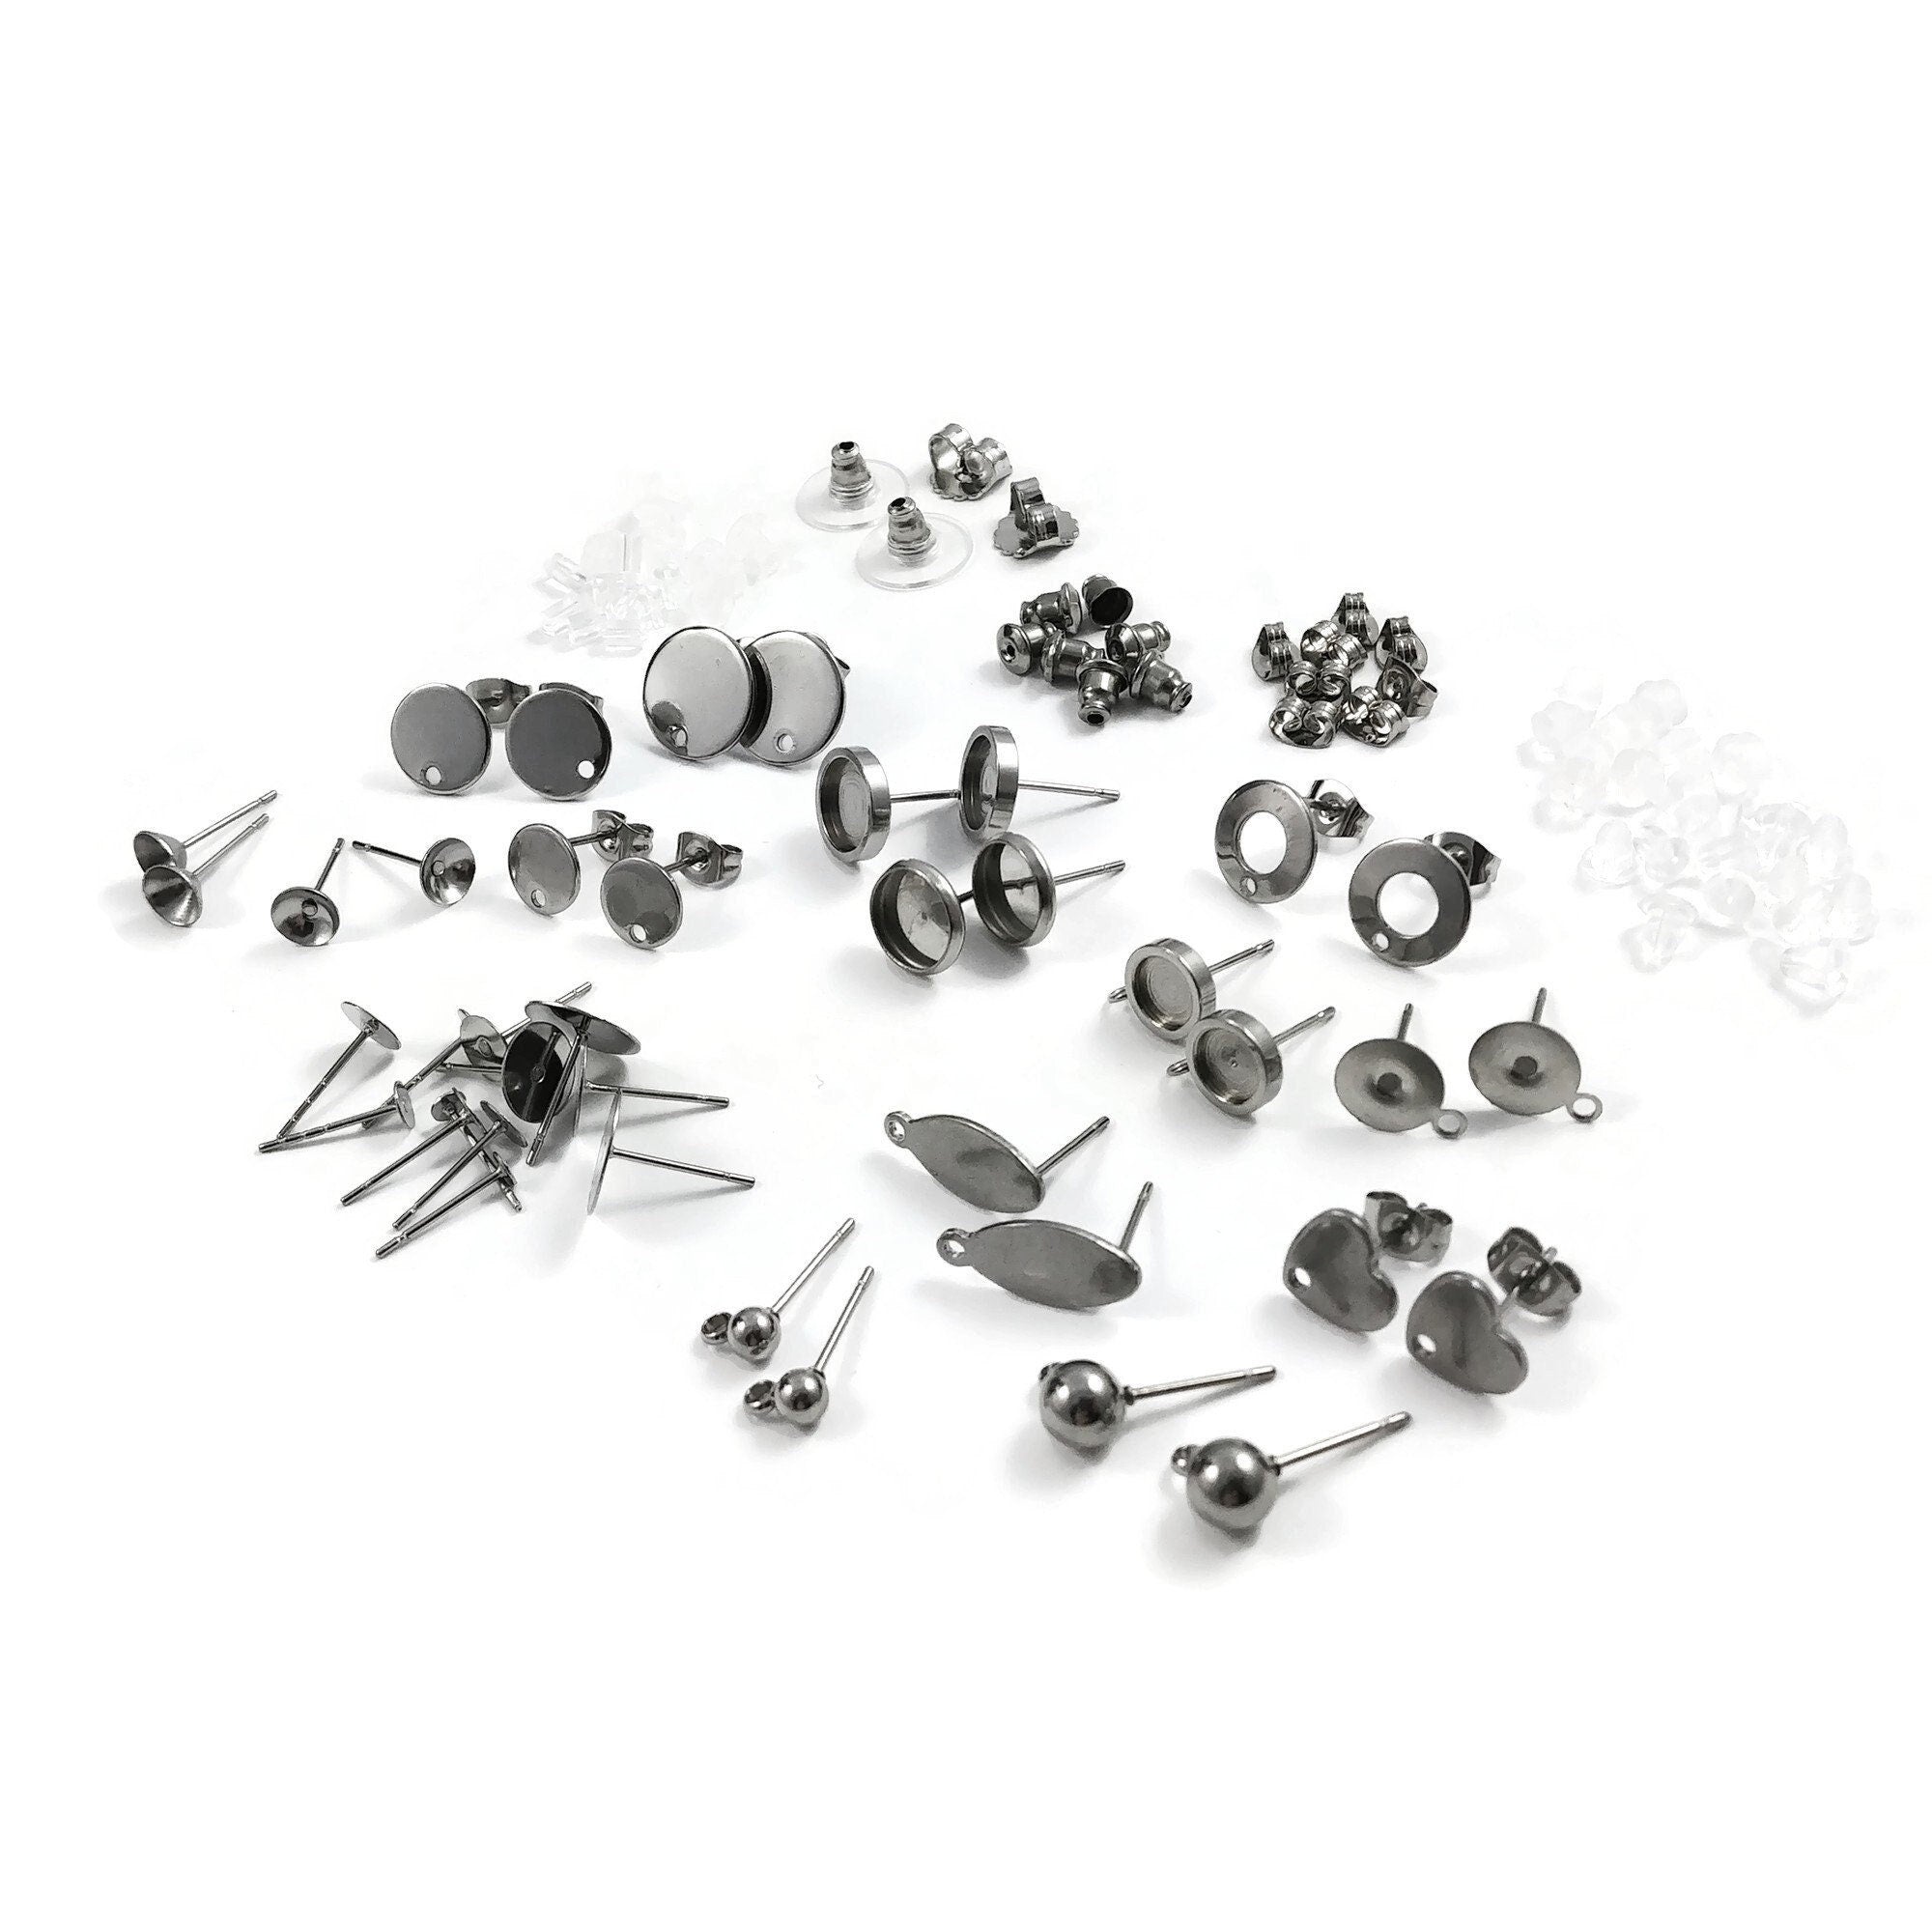 1460 Pcs Earring Making Kit Hypoallergenic Earring Posts and Backs for  Jewelry M